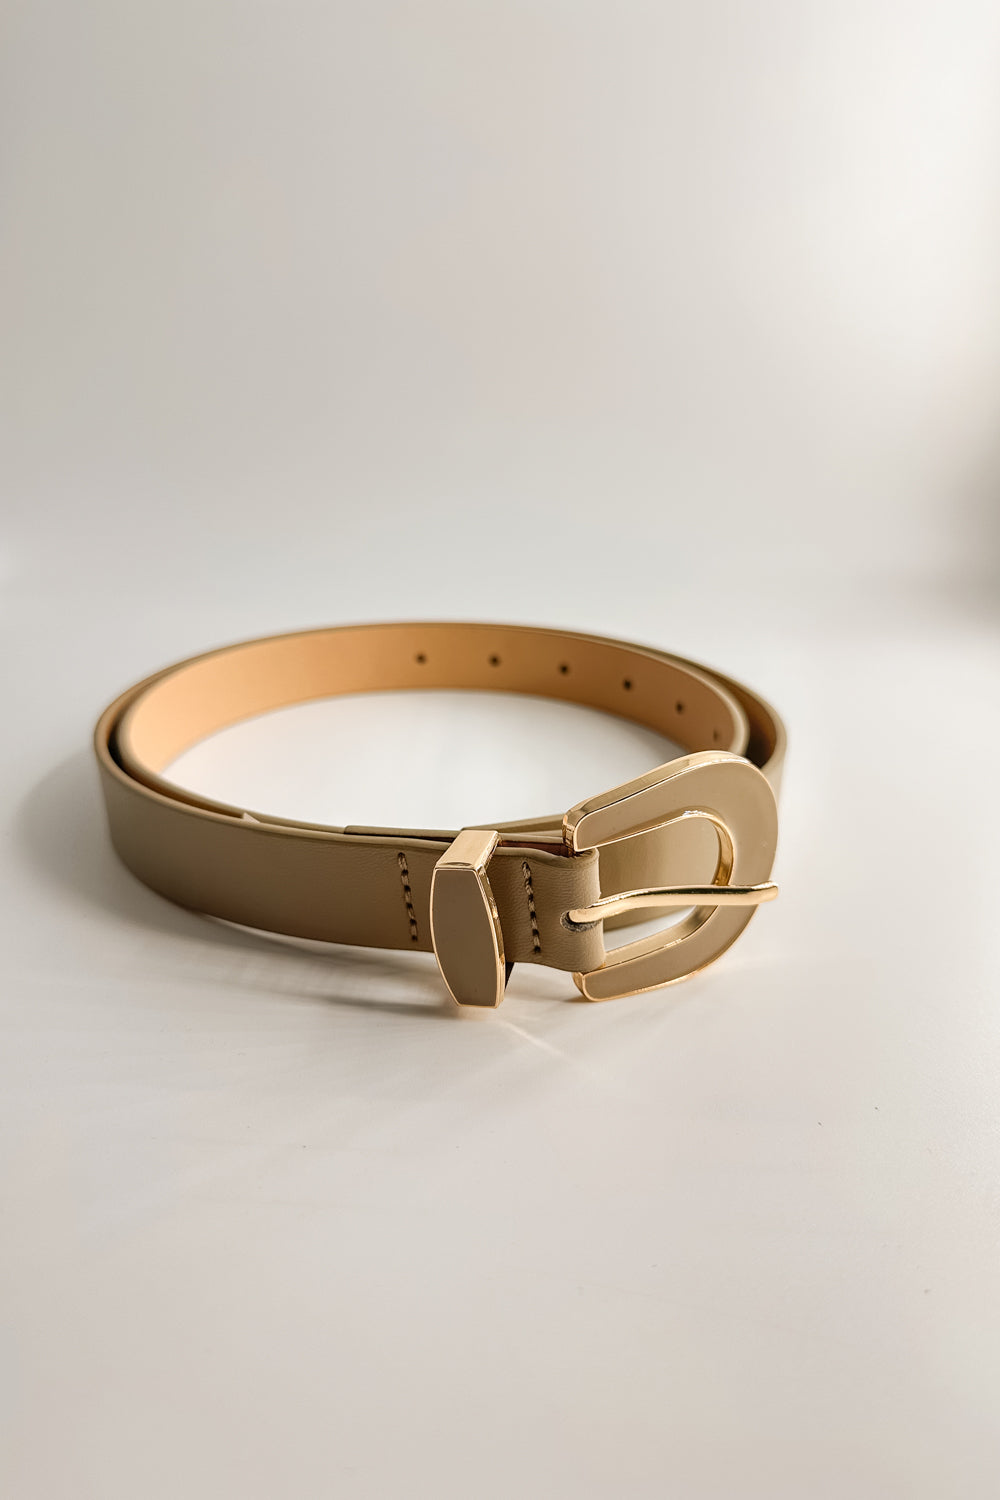 Flat Lay view of the Lucia Taupe Western Adjustable Belt which features aupe Leather Fabric, Gold Adjustable Buckle and Gold Western Detail